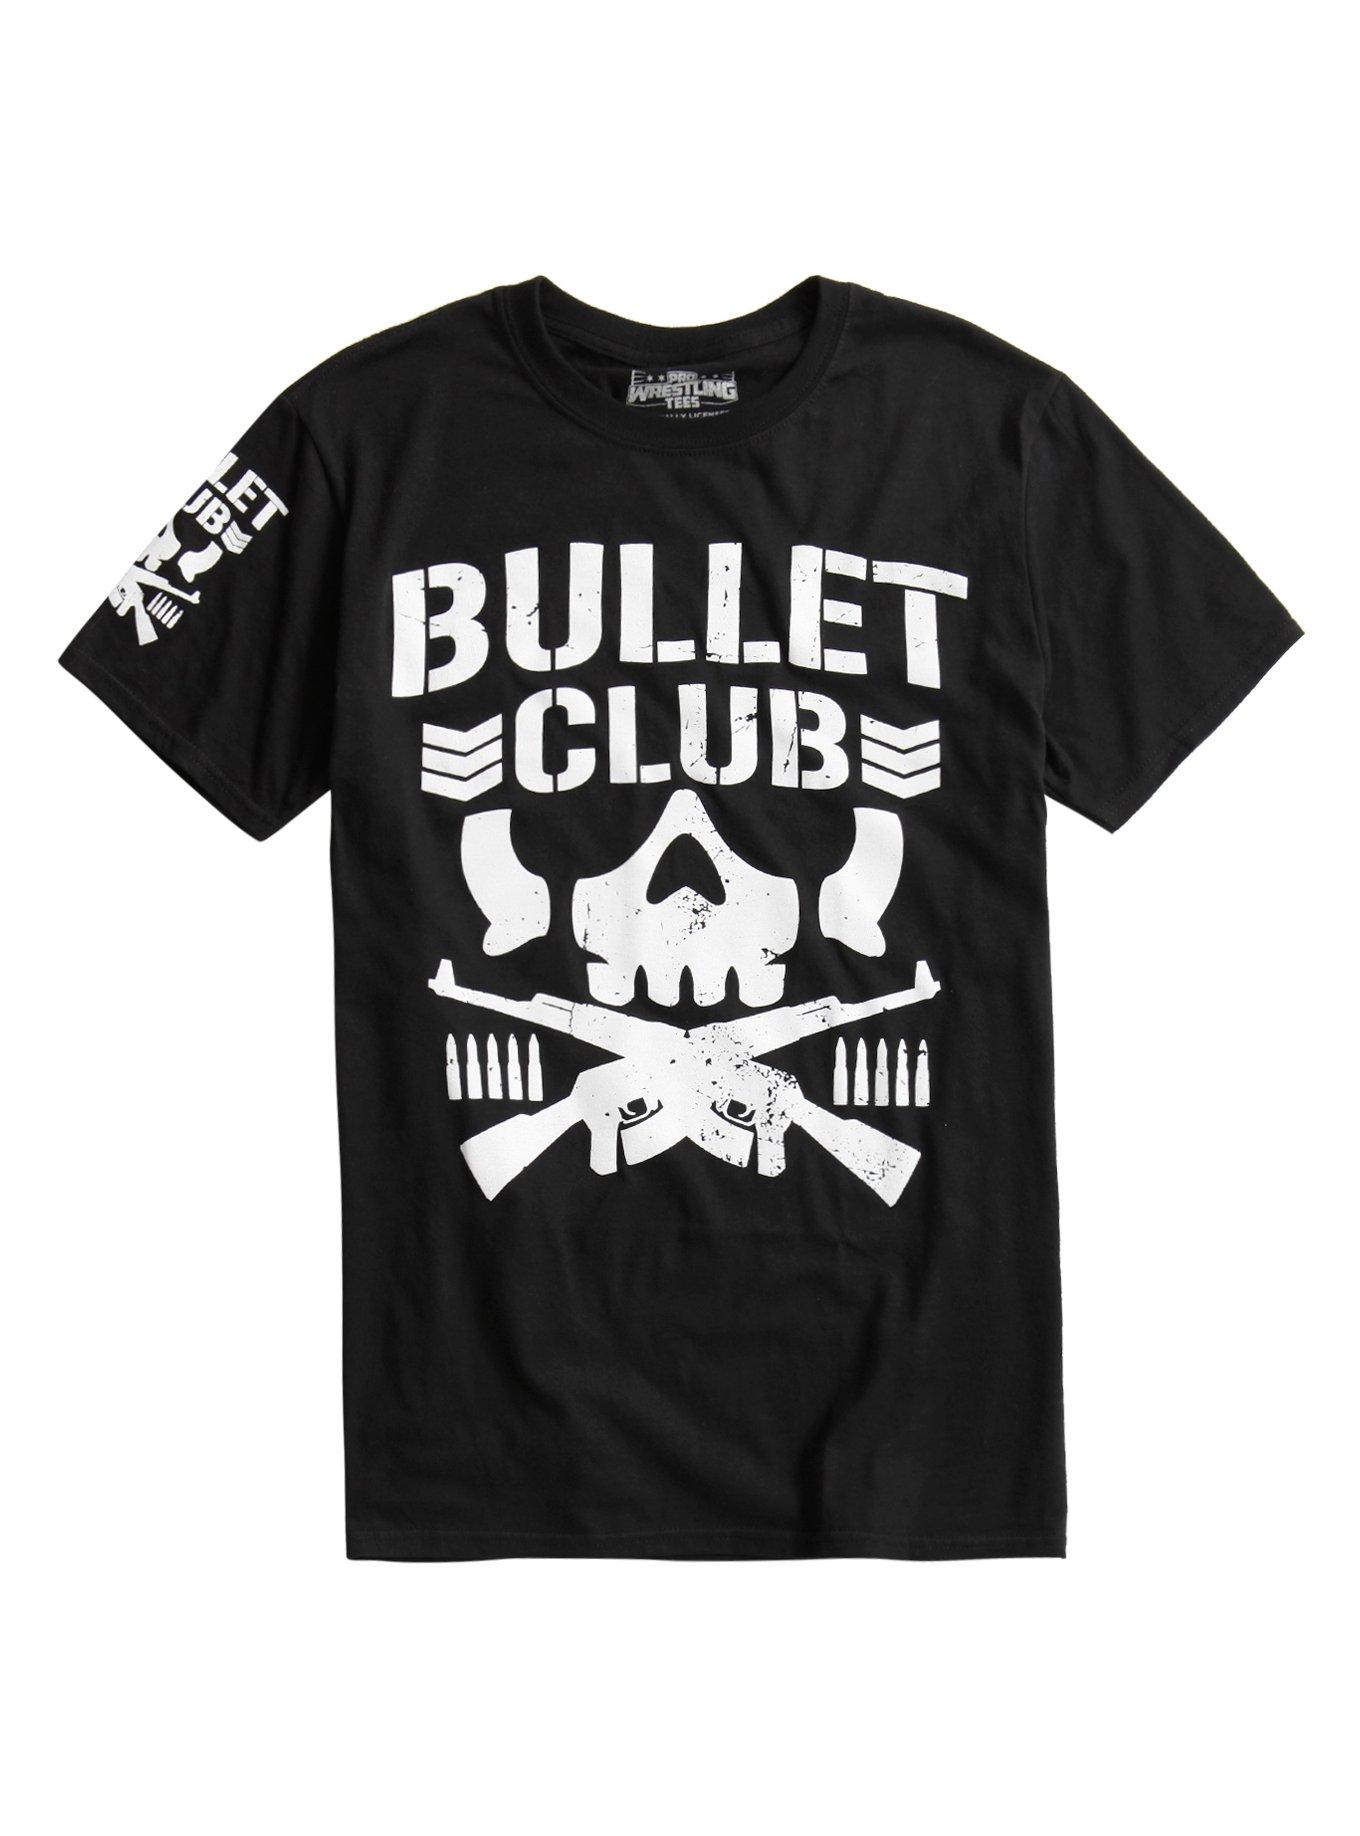 Bullet Club football jersey now on sale!